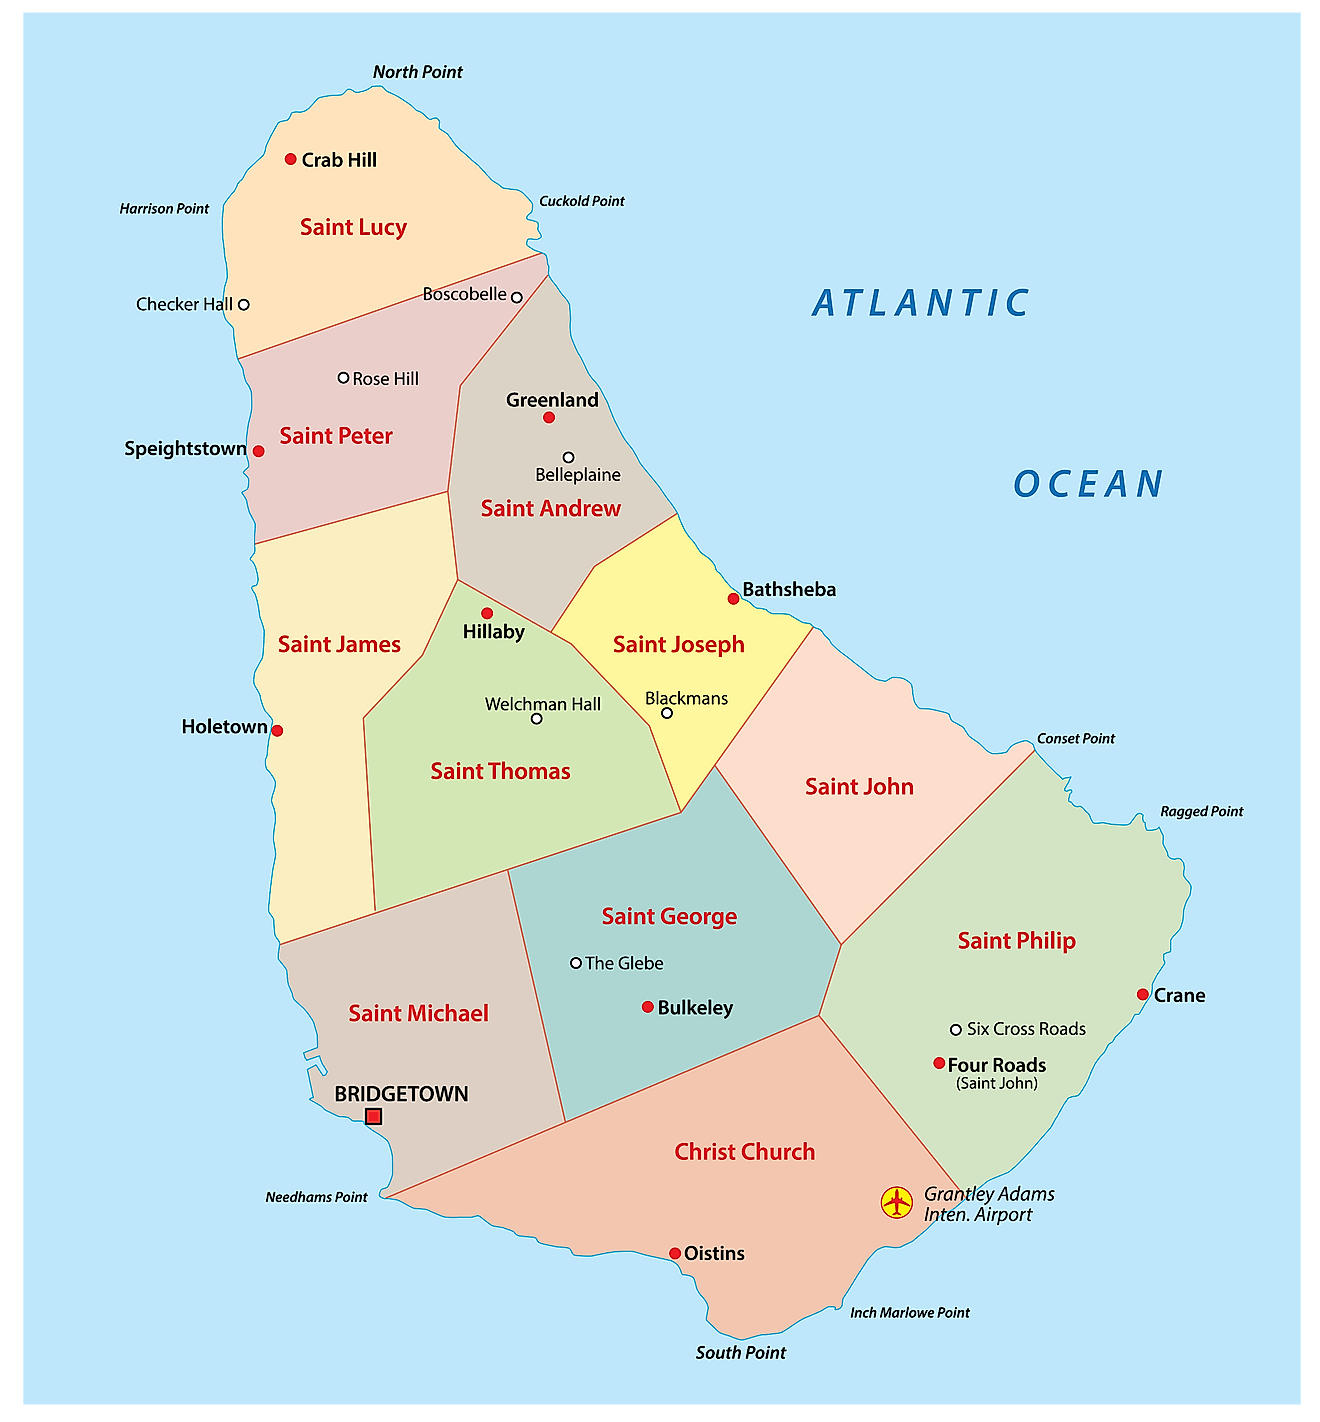 Political Map of Barbados showing its 11 parishes and the capital city of Bridgetown